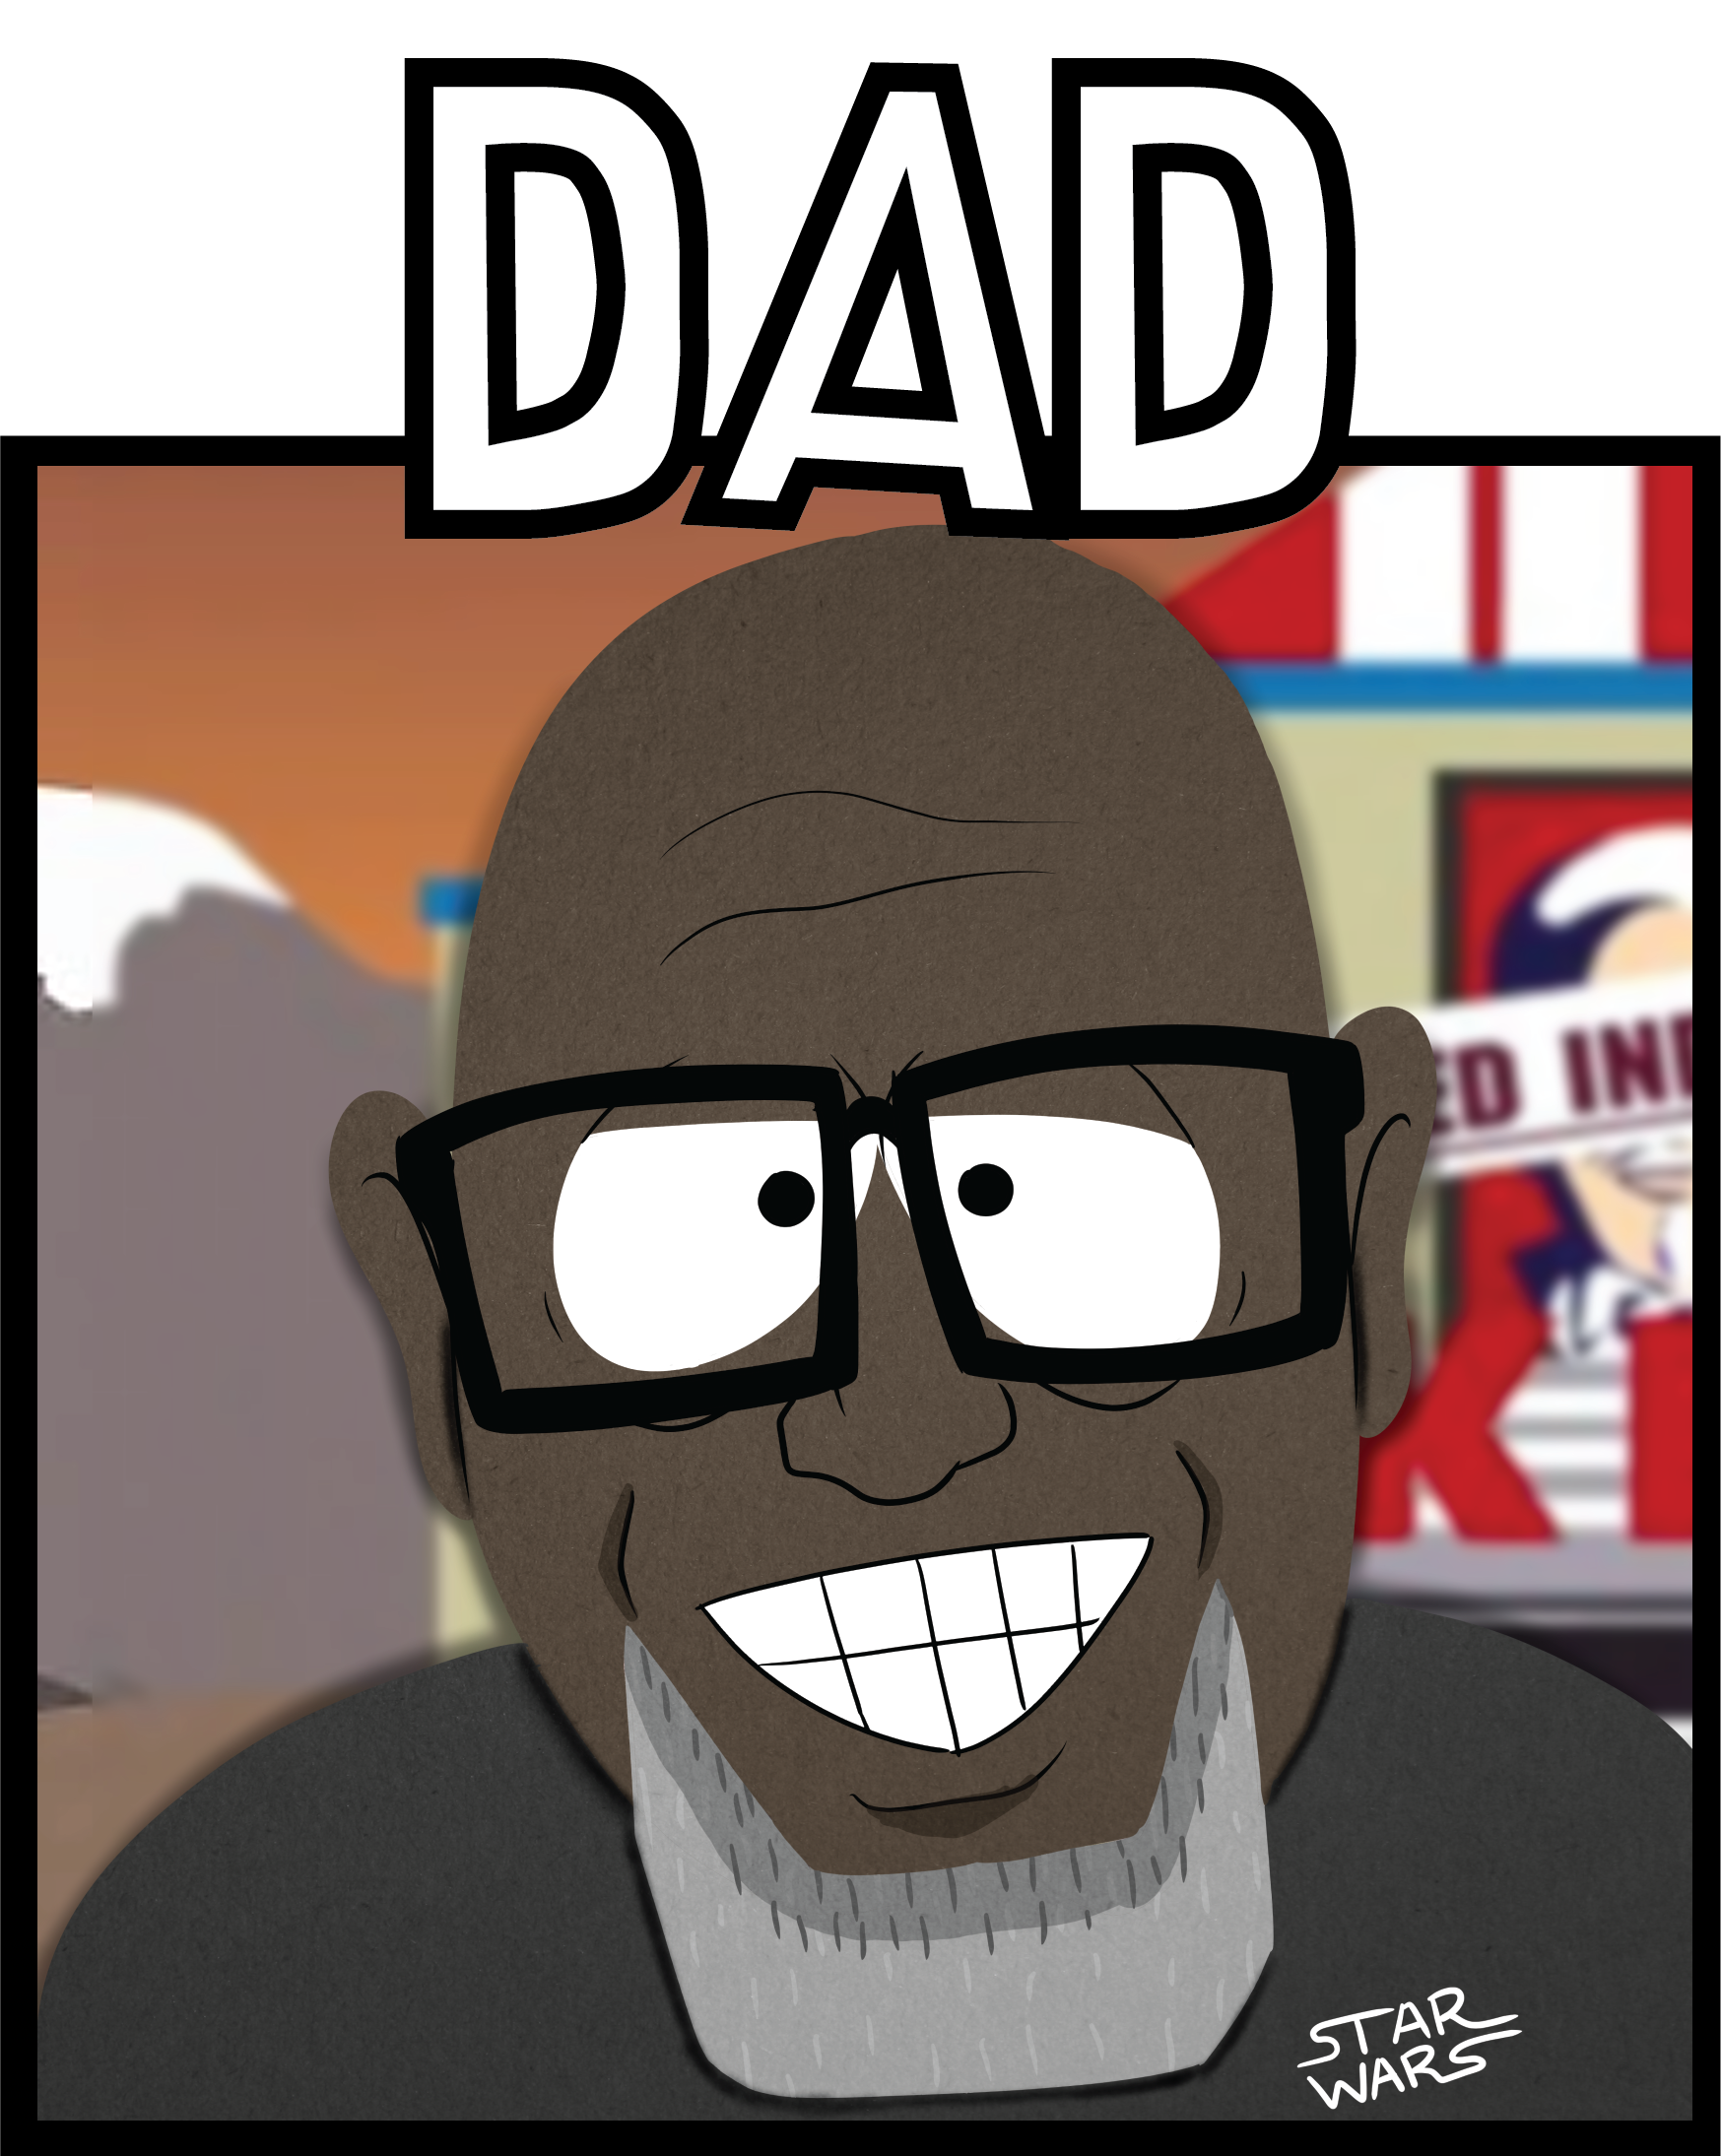 Dad front.png